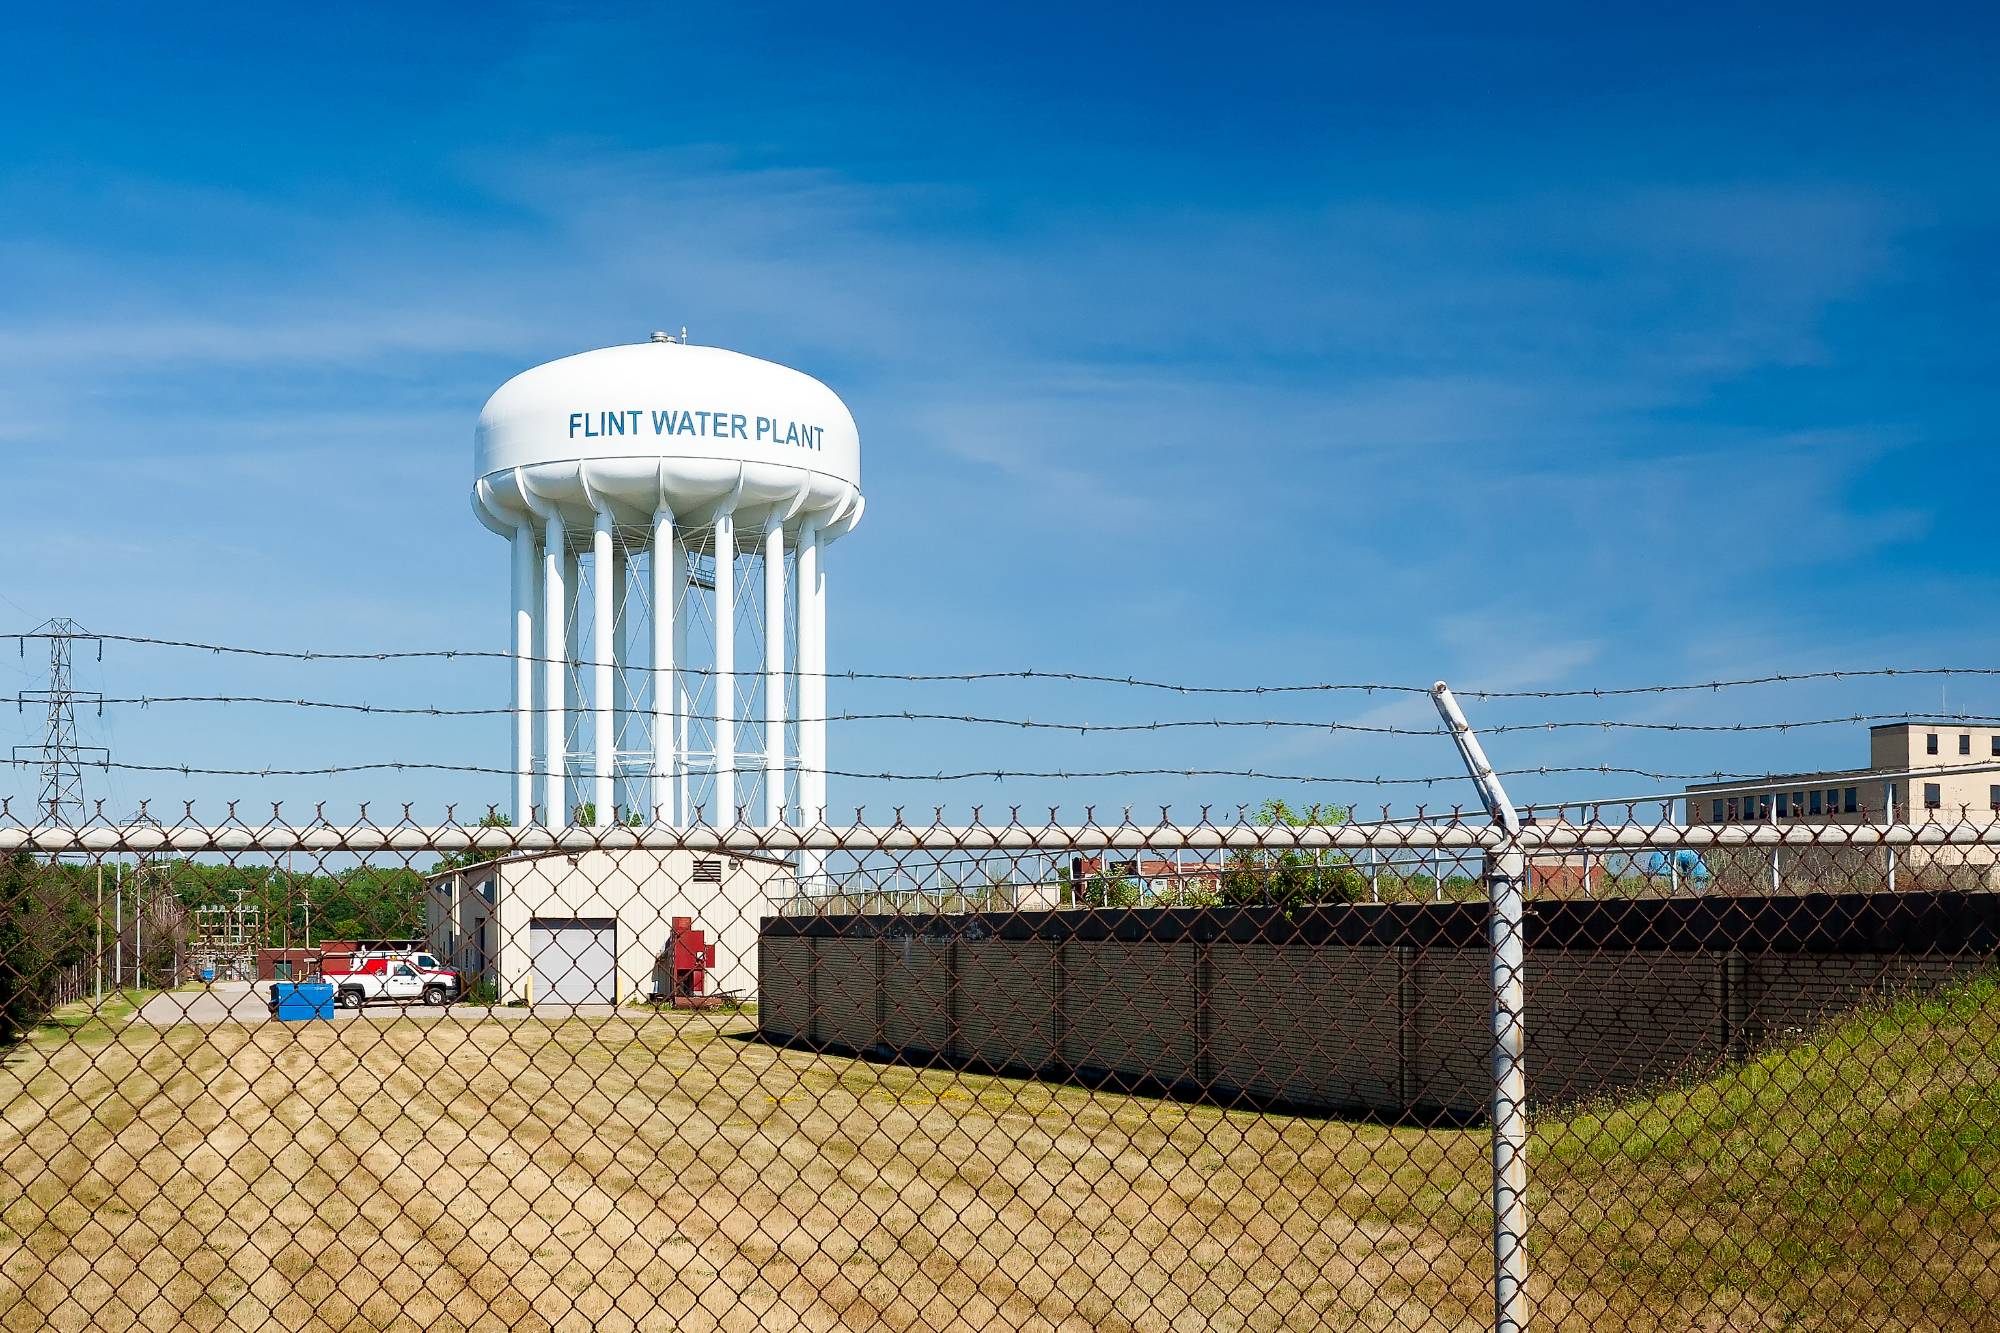 A water tower surrounded by barbed wire in Flint, Michigan. Photo by George Thomas under Creative Commons licensing.